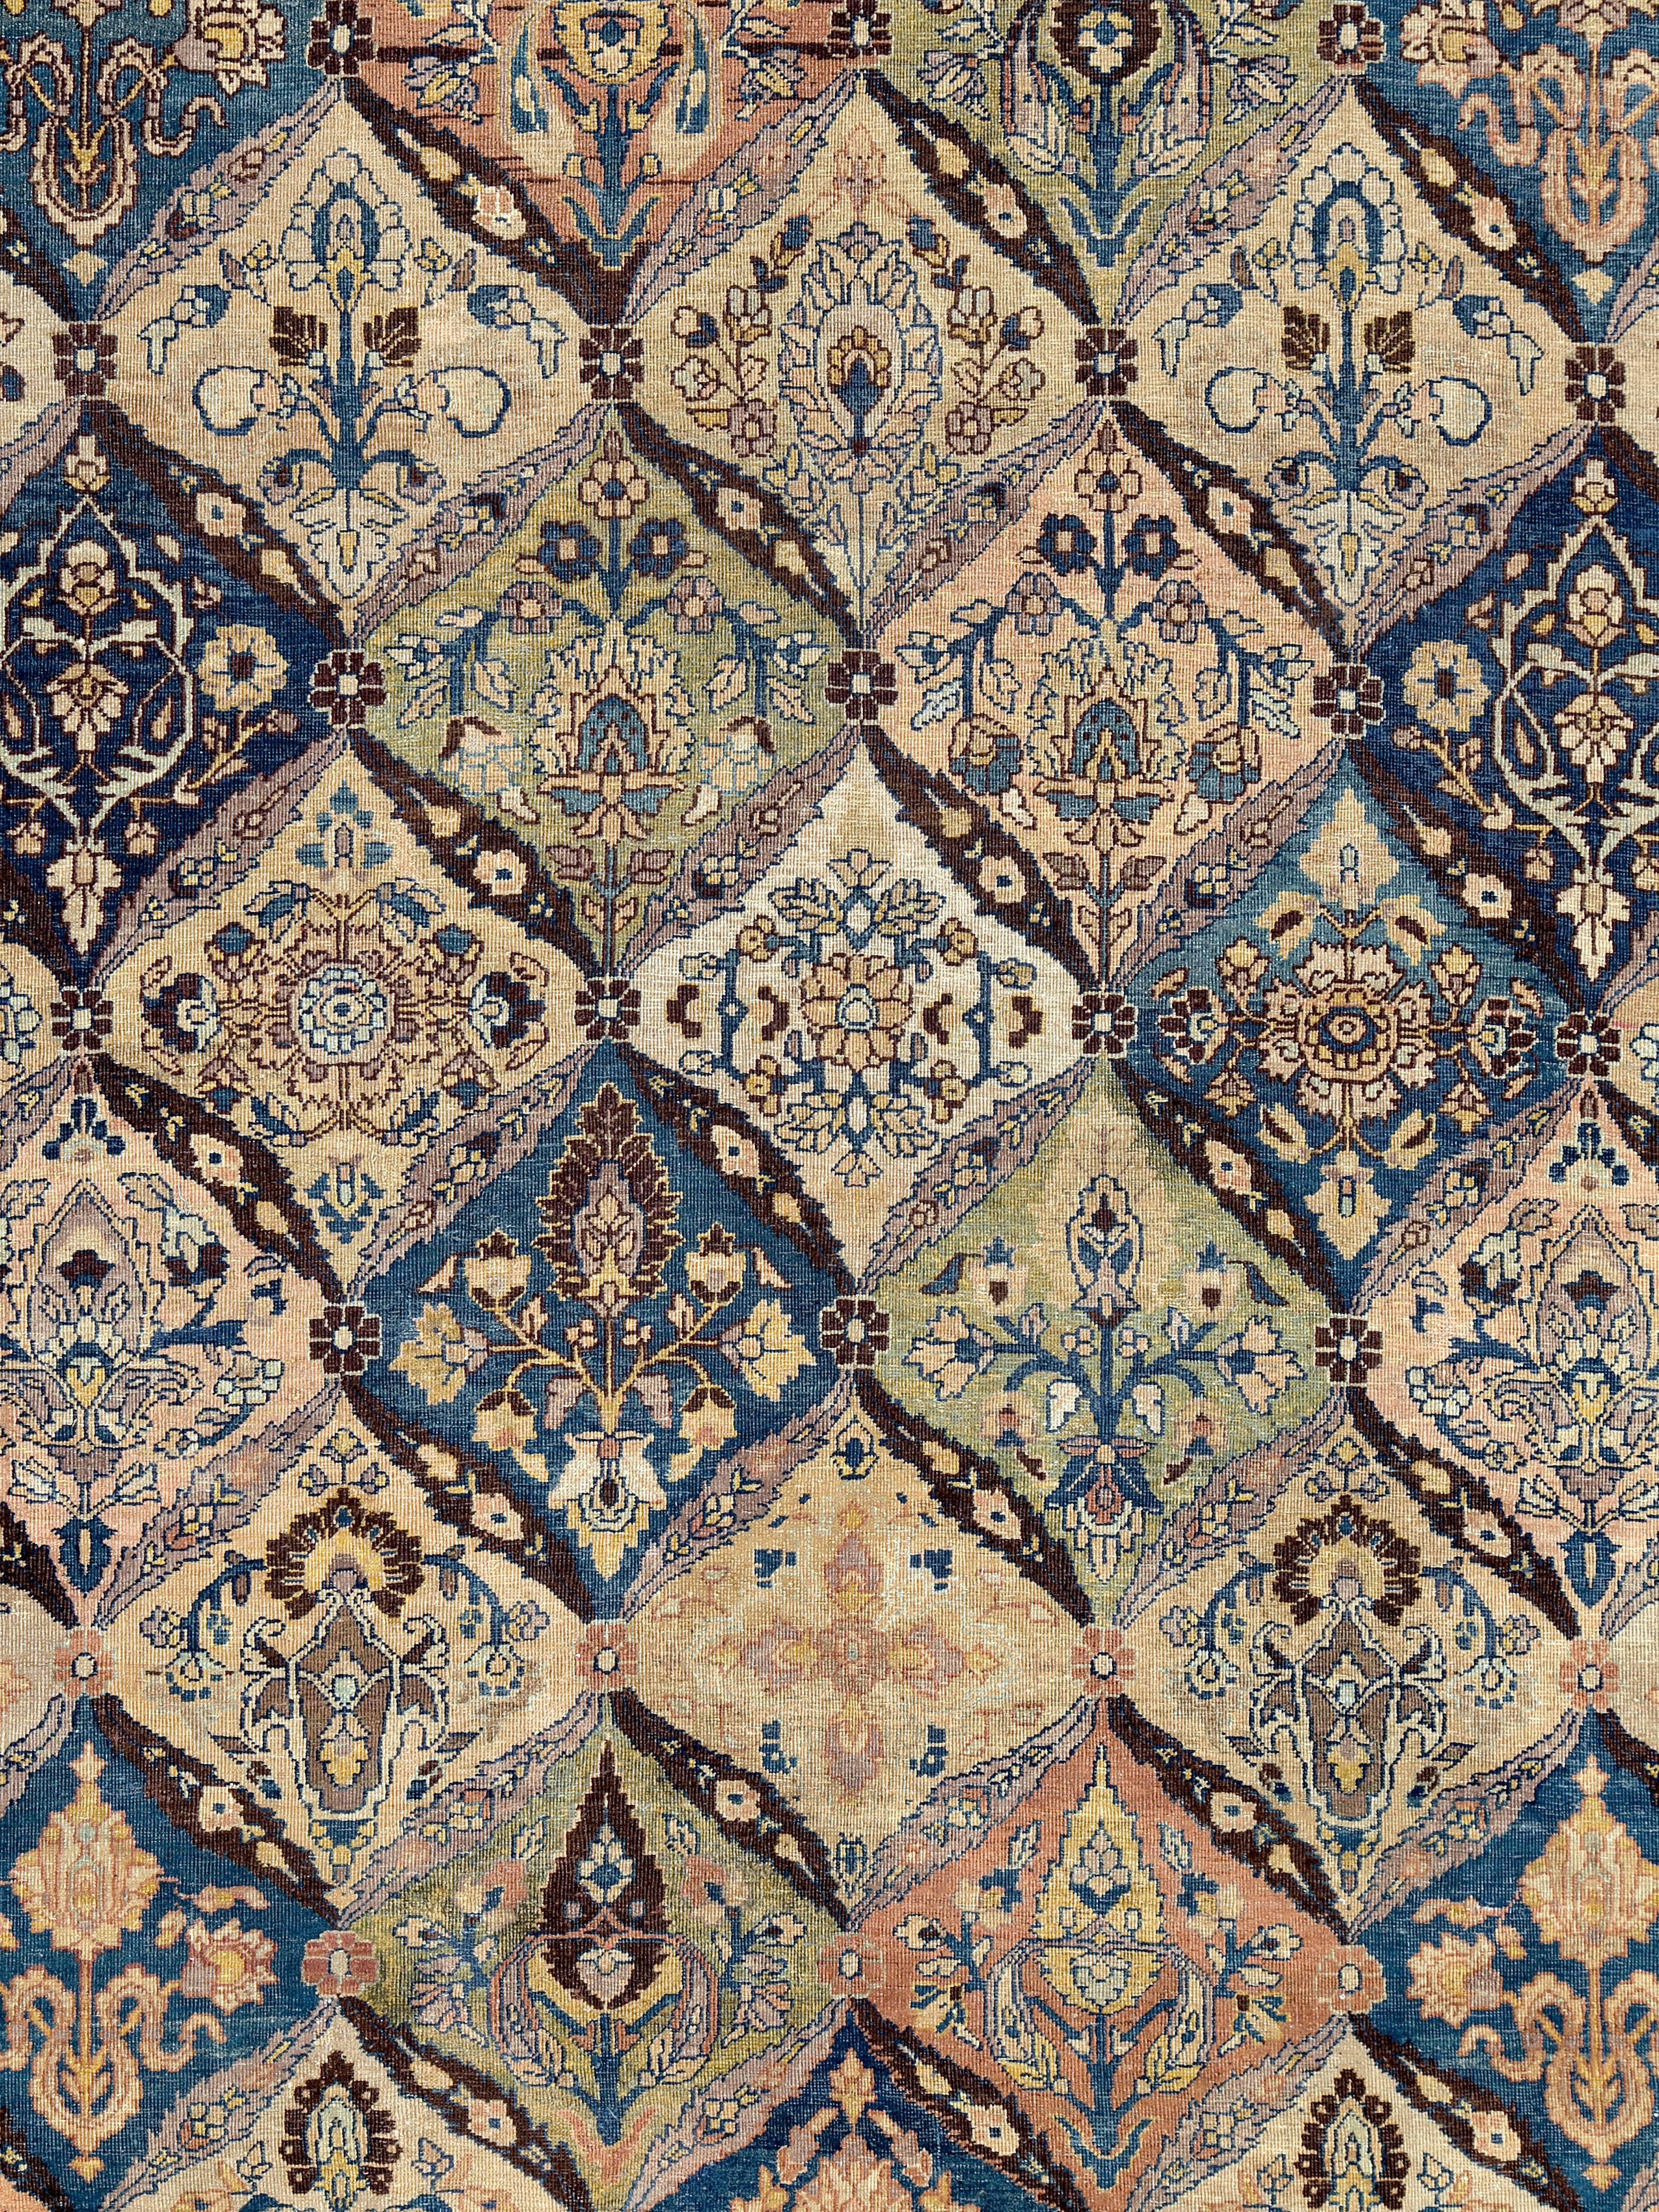 An antique Persian Tabriz rug from the early 20th century with a multicolored garden design.